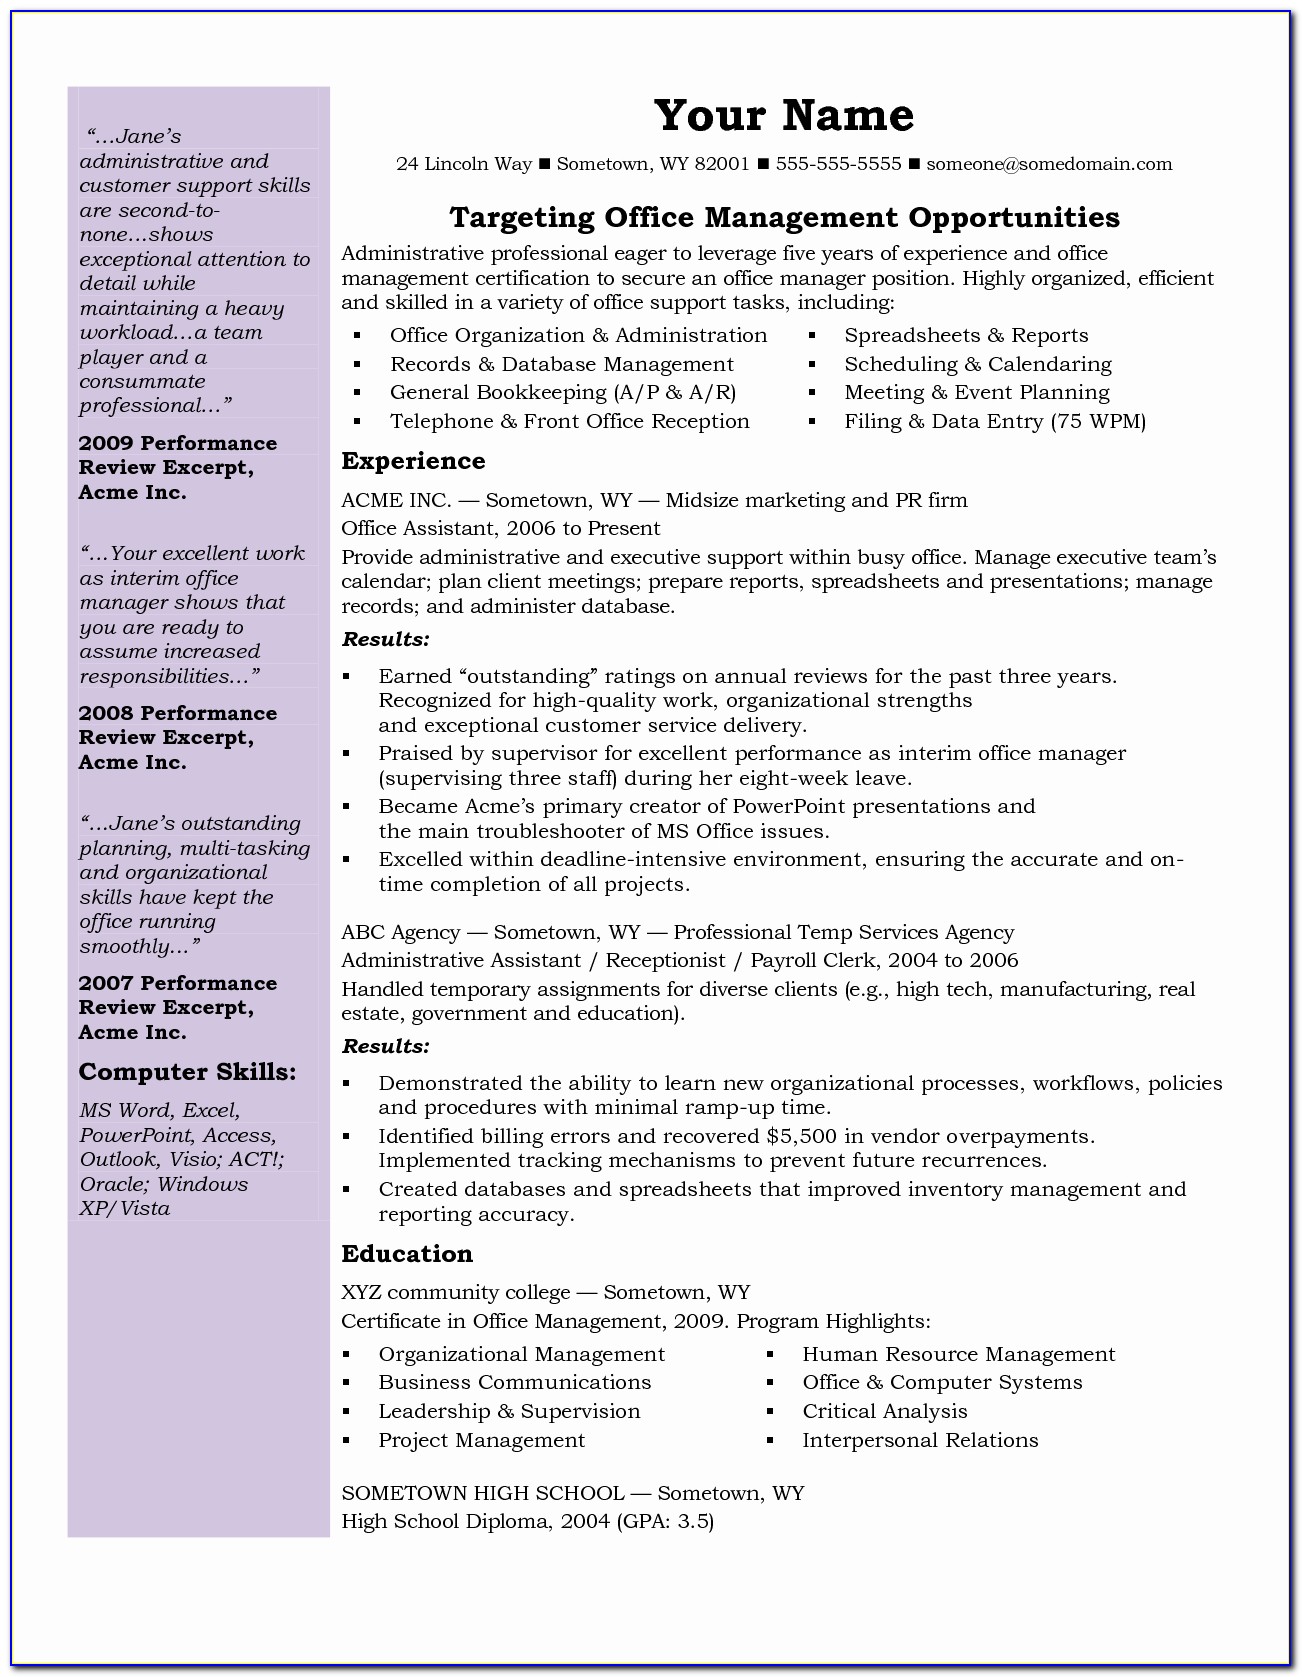 Sample Resume For Medical Billing And Coding With No Experienc